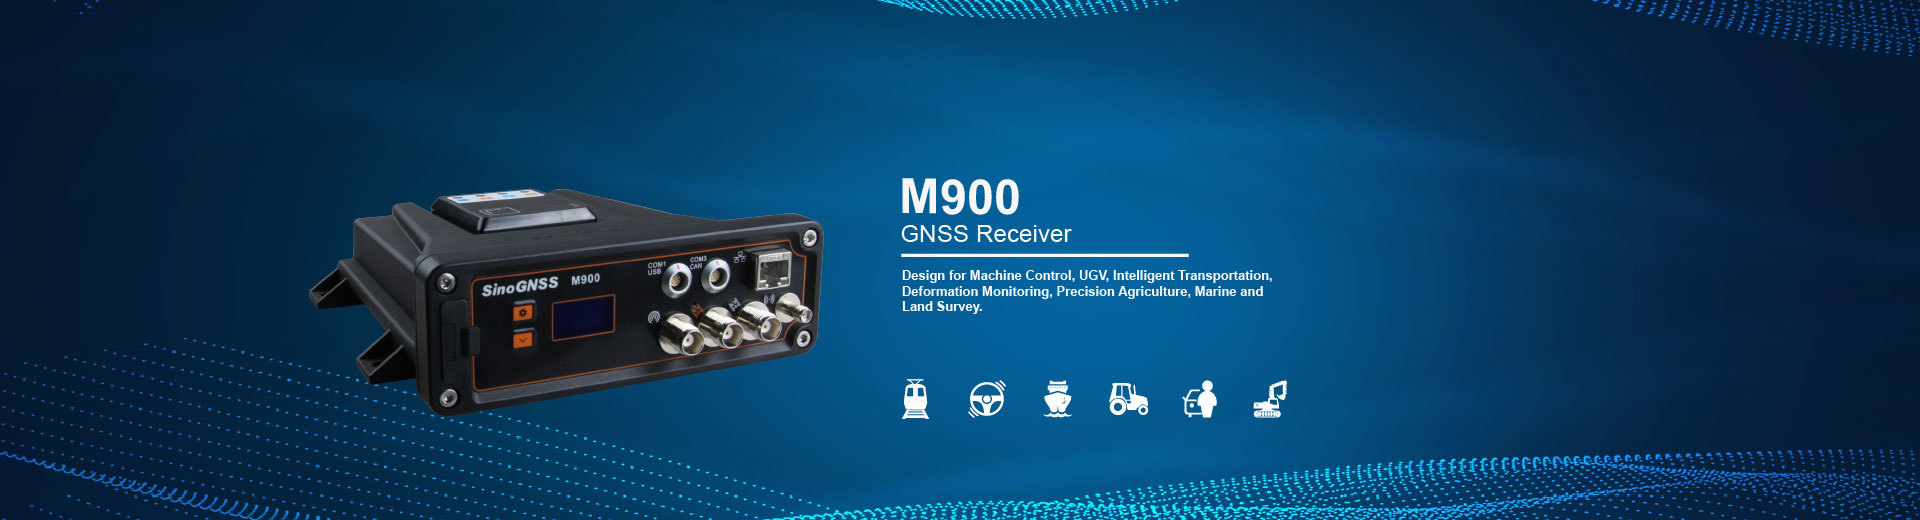 M900 GNSS Receiver